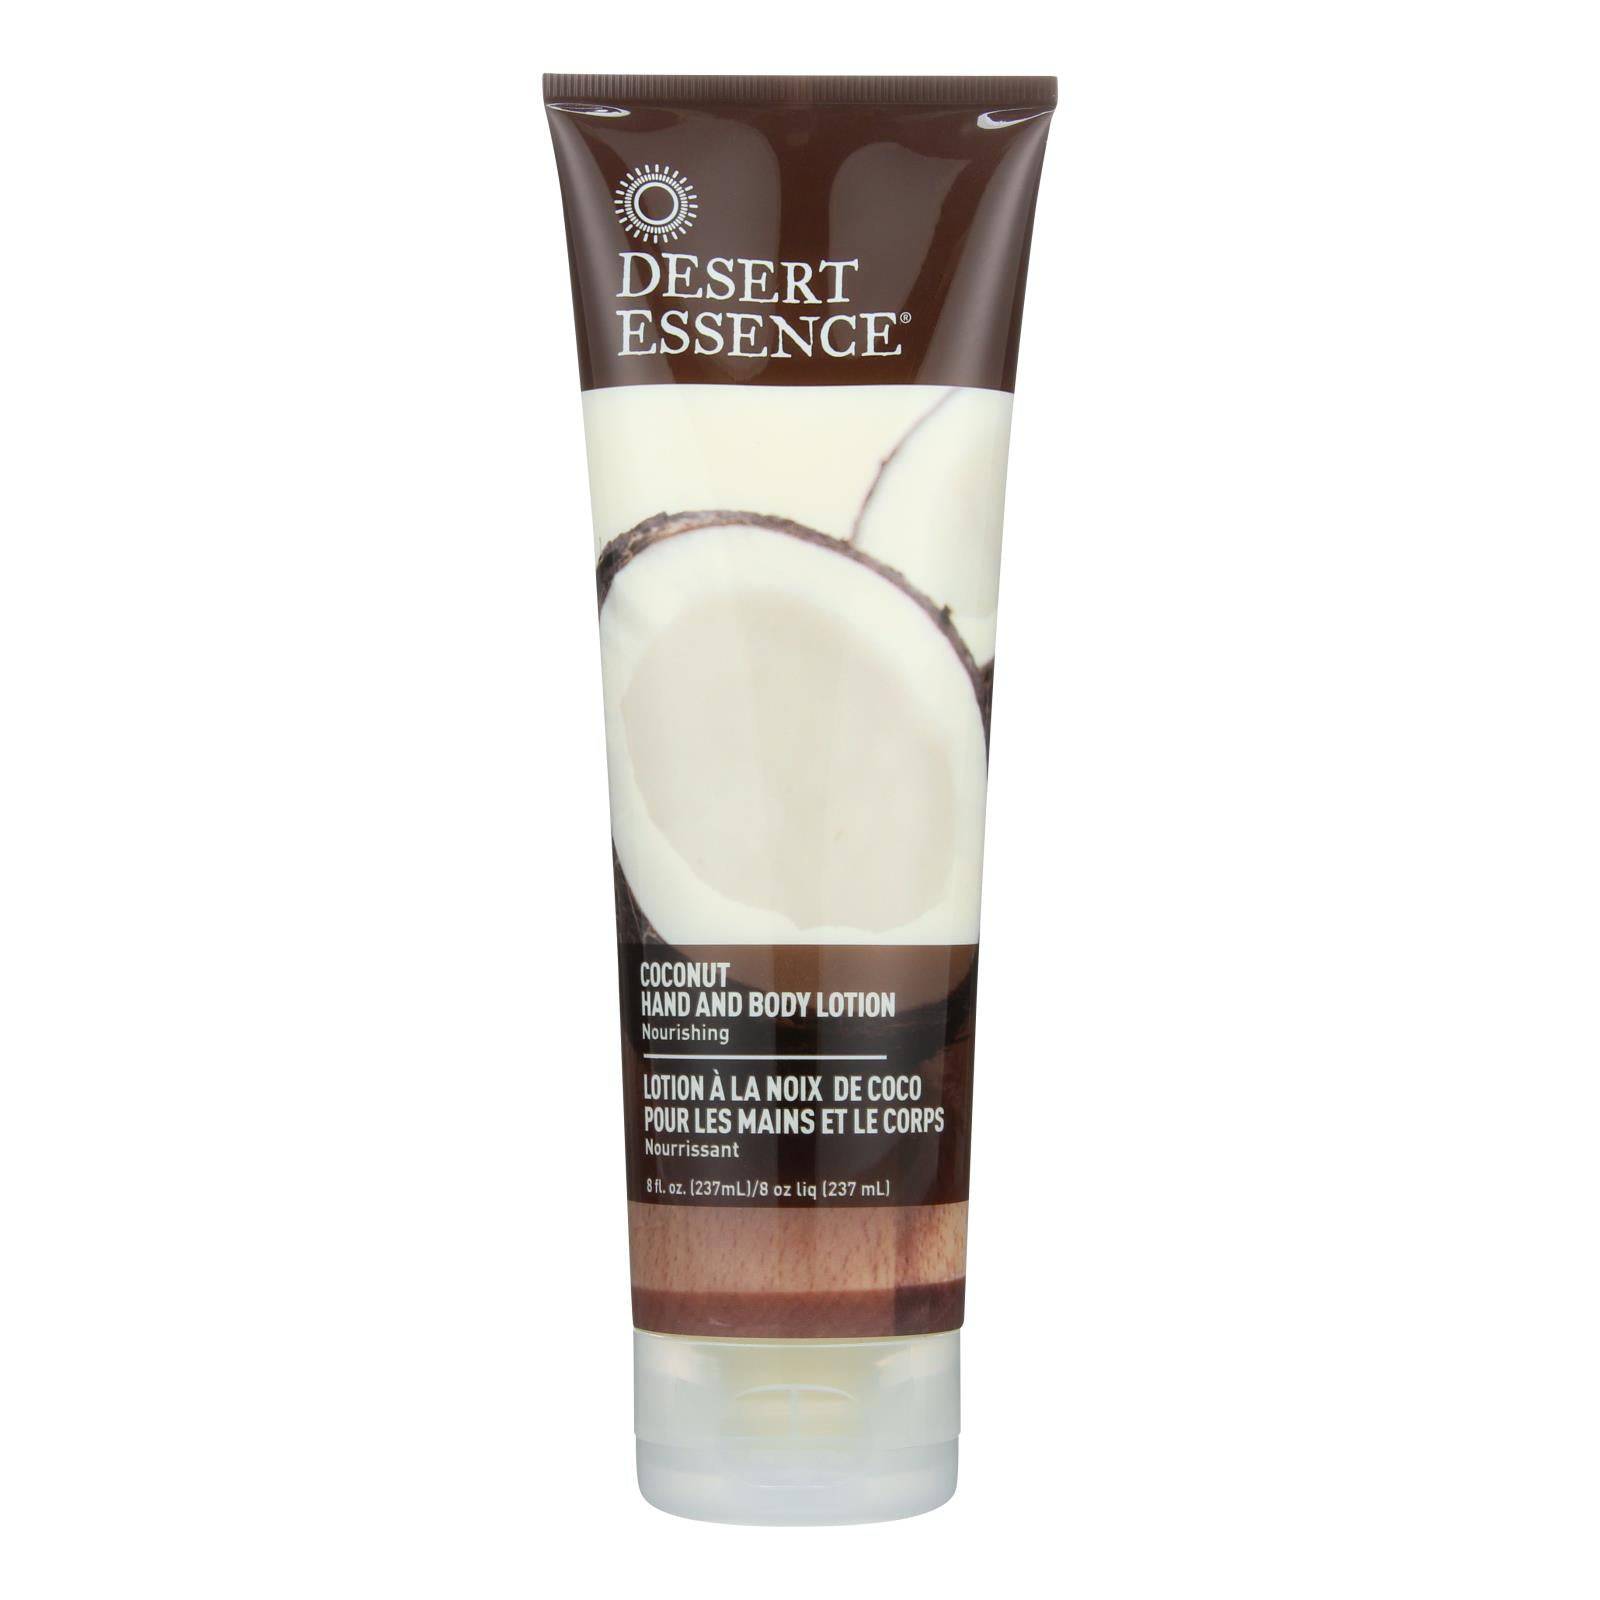 Buy Desert Essence - Hand And Body Lotion Coconut - 8 Fl Oz  at OnlyNaturals.us